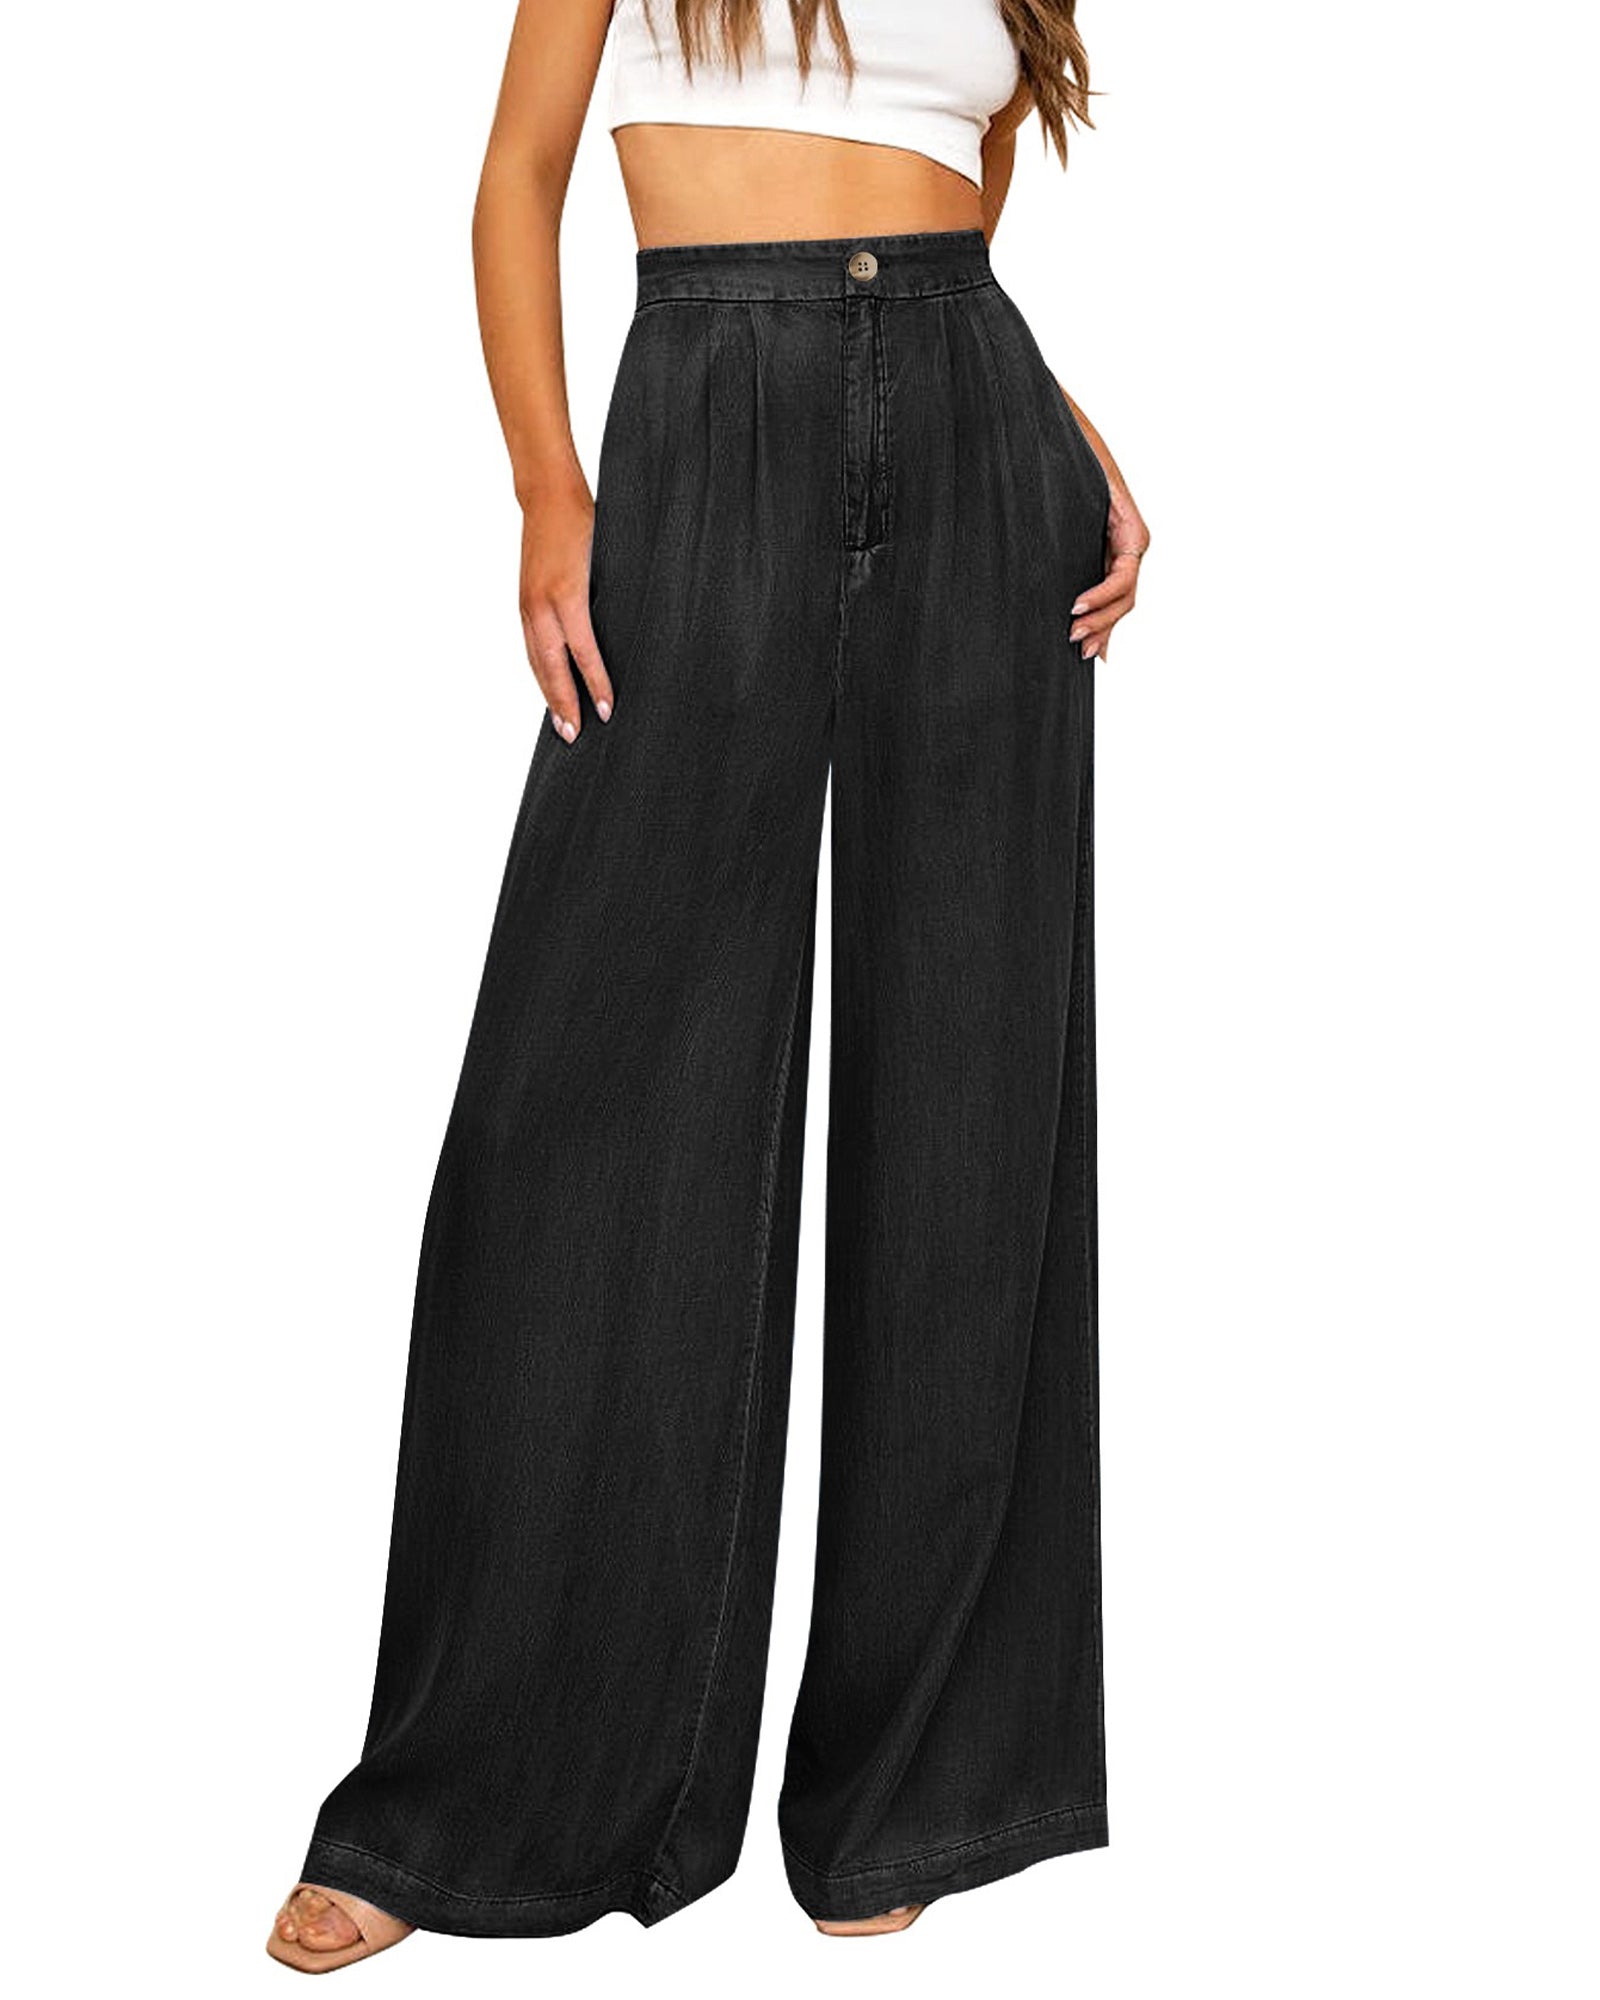 GRAPENT 2023 Wide Leg Pants for Women High Waisted Jeans Palazzo